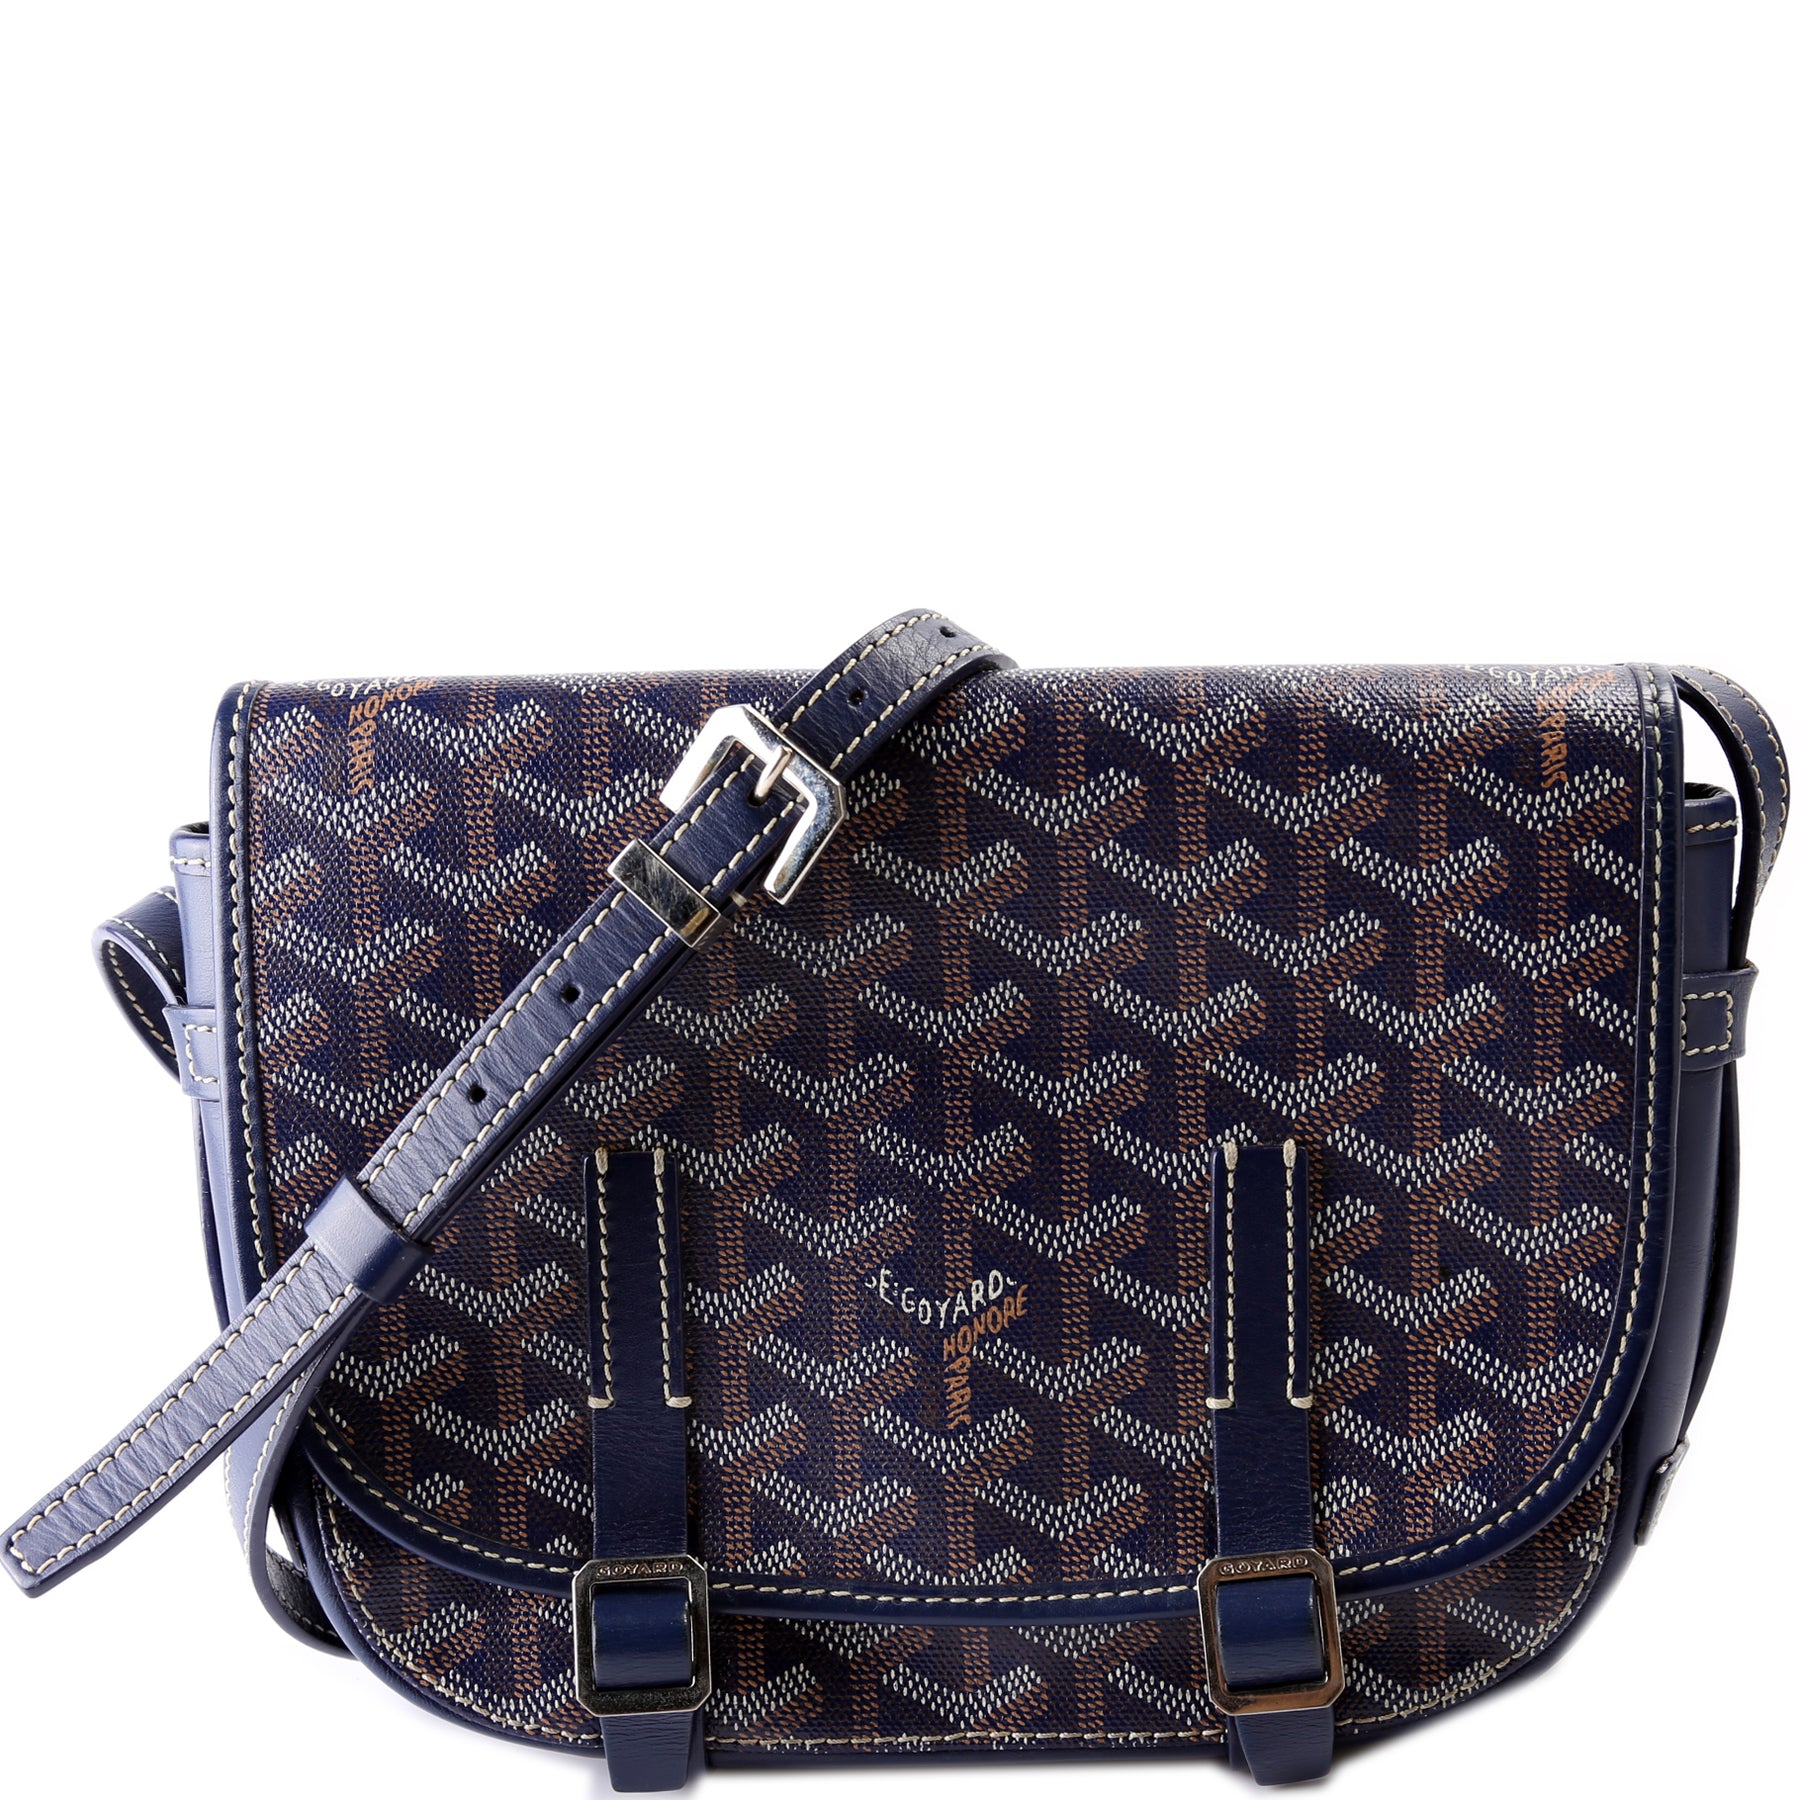 Authentic Goyard St Louis PM Tote Navy for Sale in Plano, TX